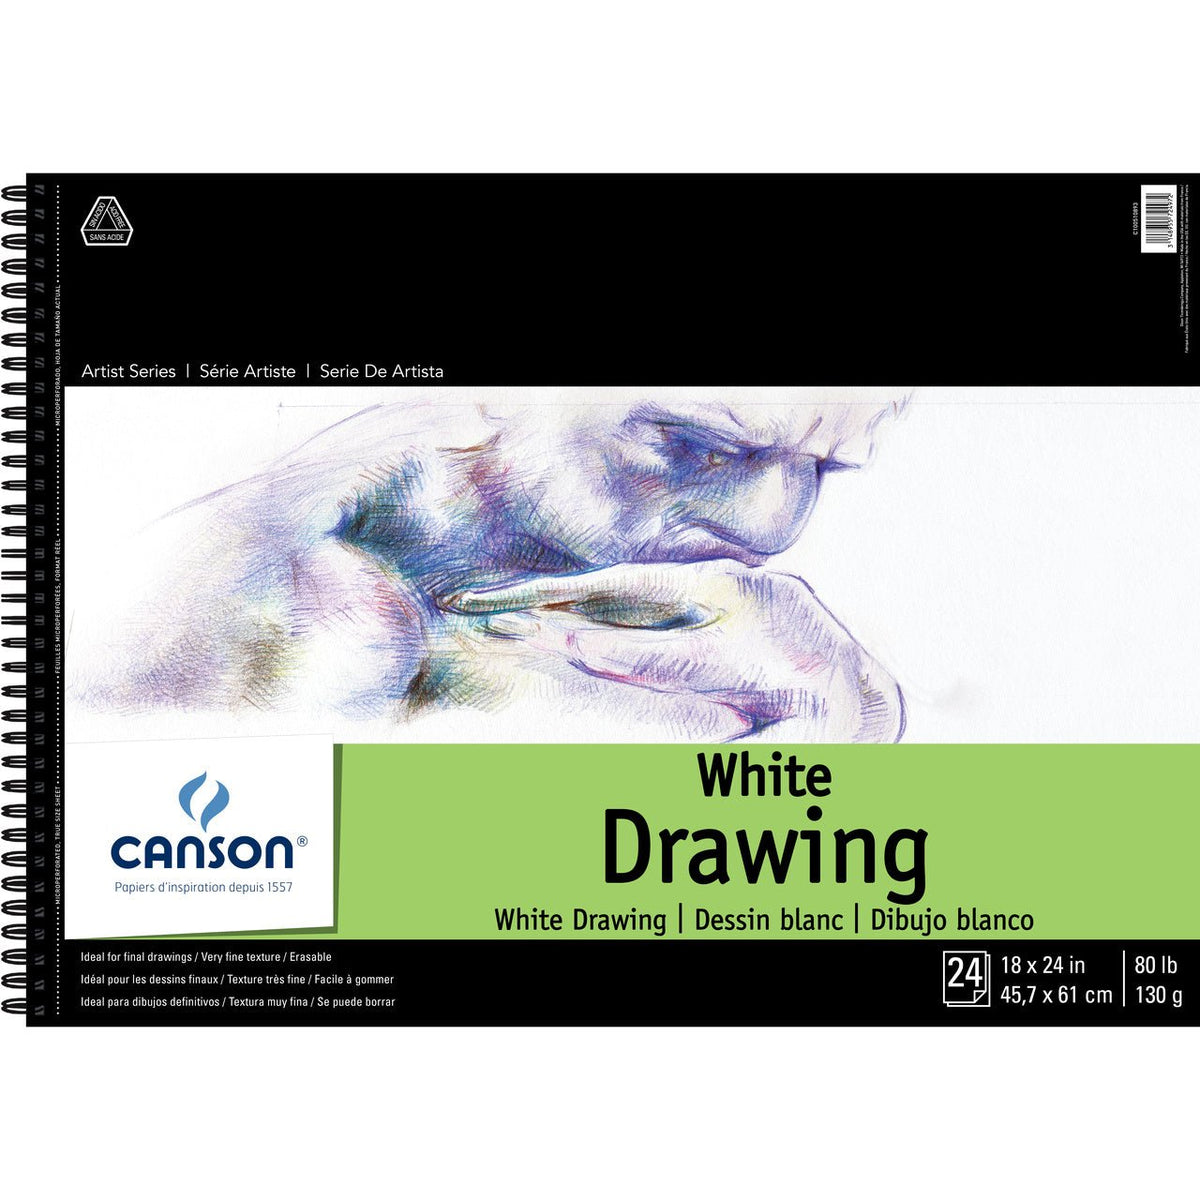 Pentalic Nature Sketch Pad 8.5x11 - Wet Paint Artists' Materials and  Framing